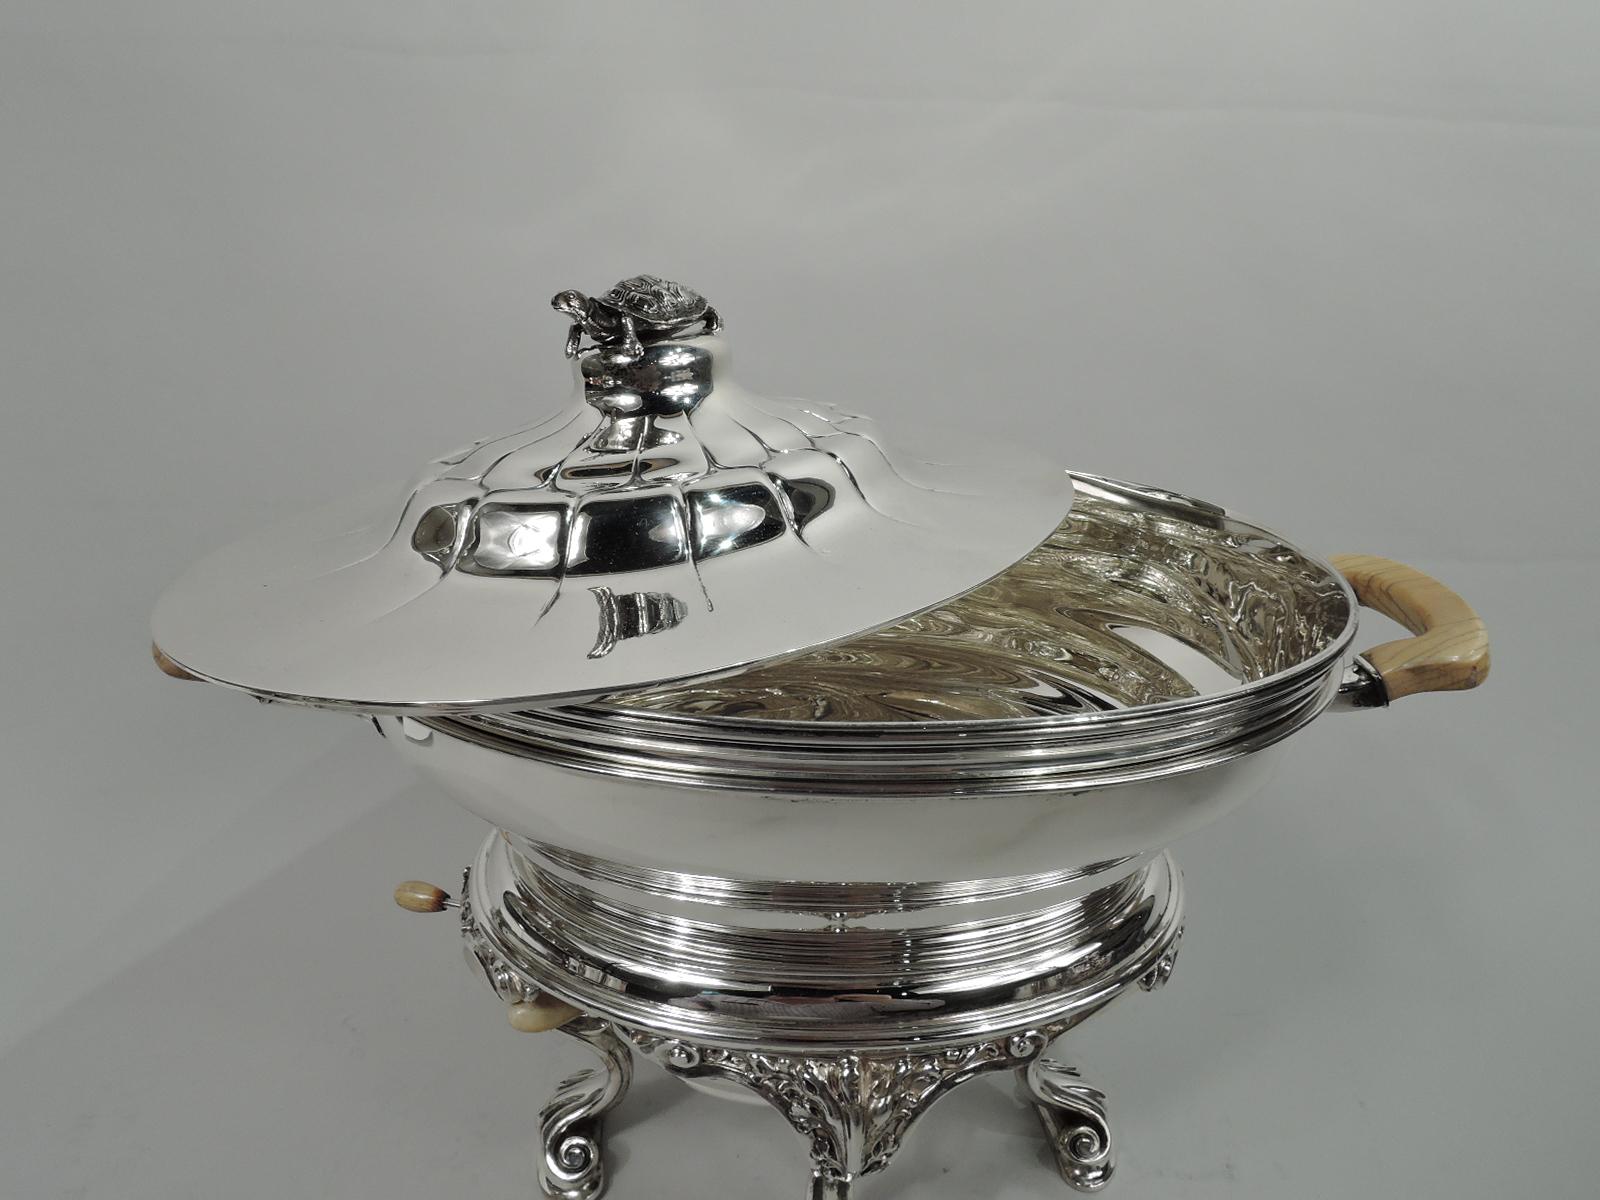 Edwardian sterling silver chafing dish. Made by Gorham in Providence in 1903. Oval bombe bowl with leaf-mounted bracket handles. Liner has reeded rim. Cover double-domed with tooled shell pattern and cast turtle finial with overhanging legs,